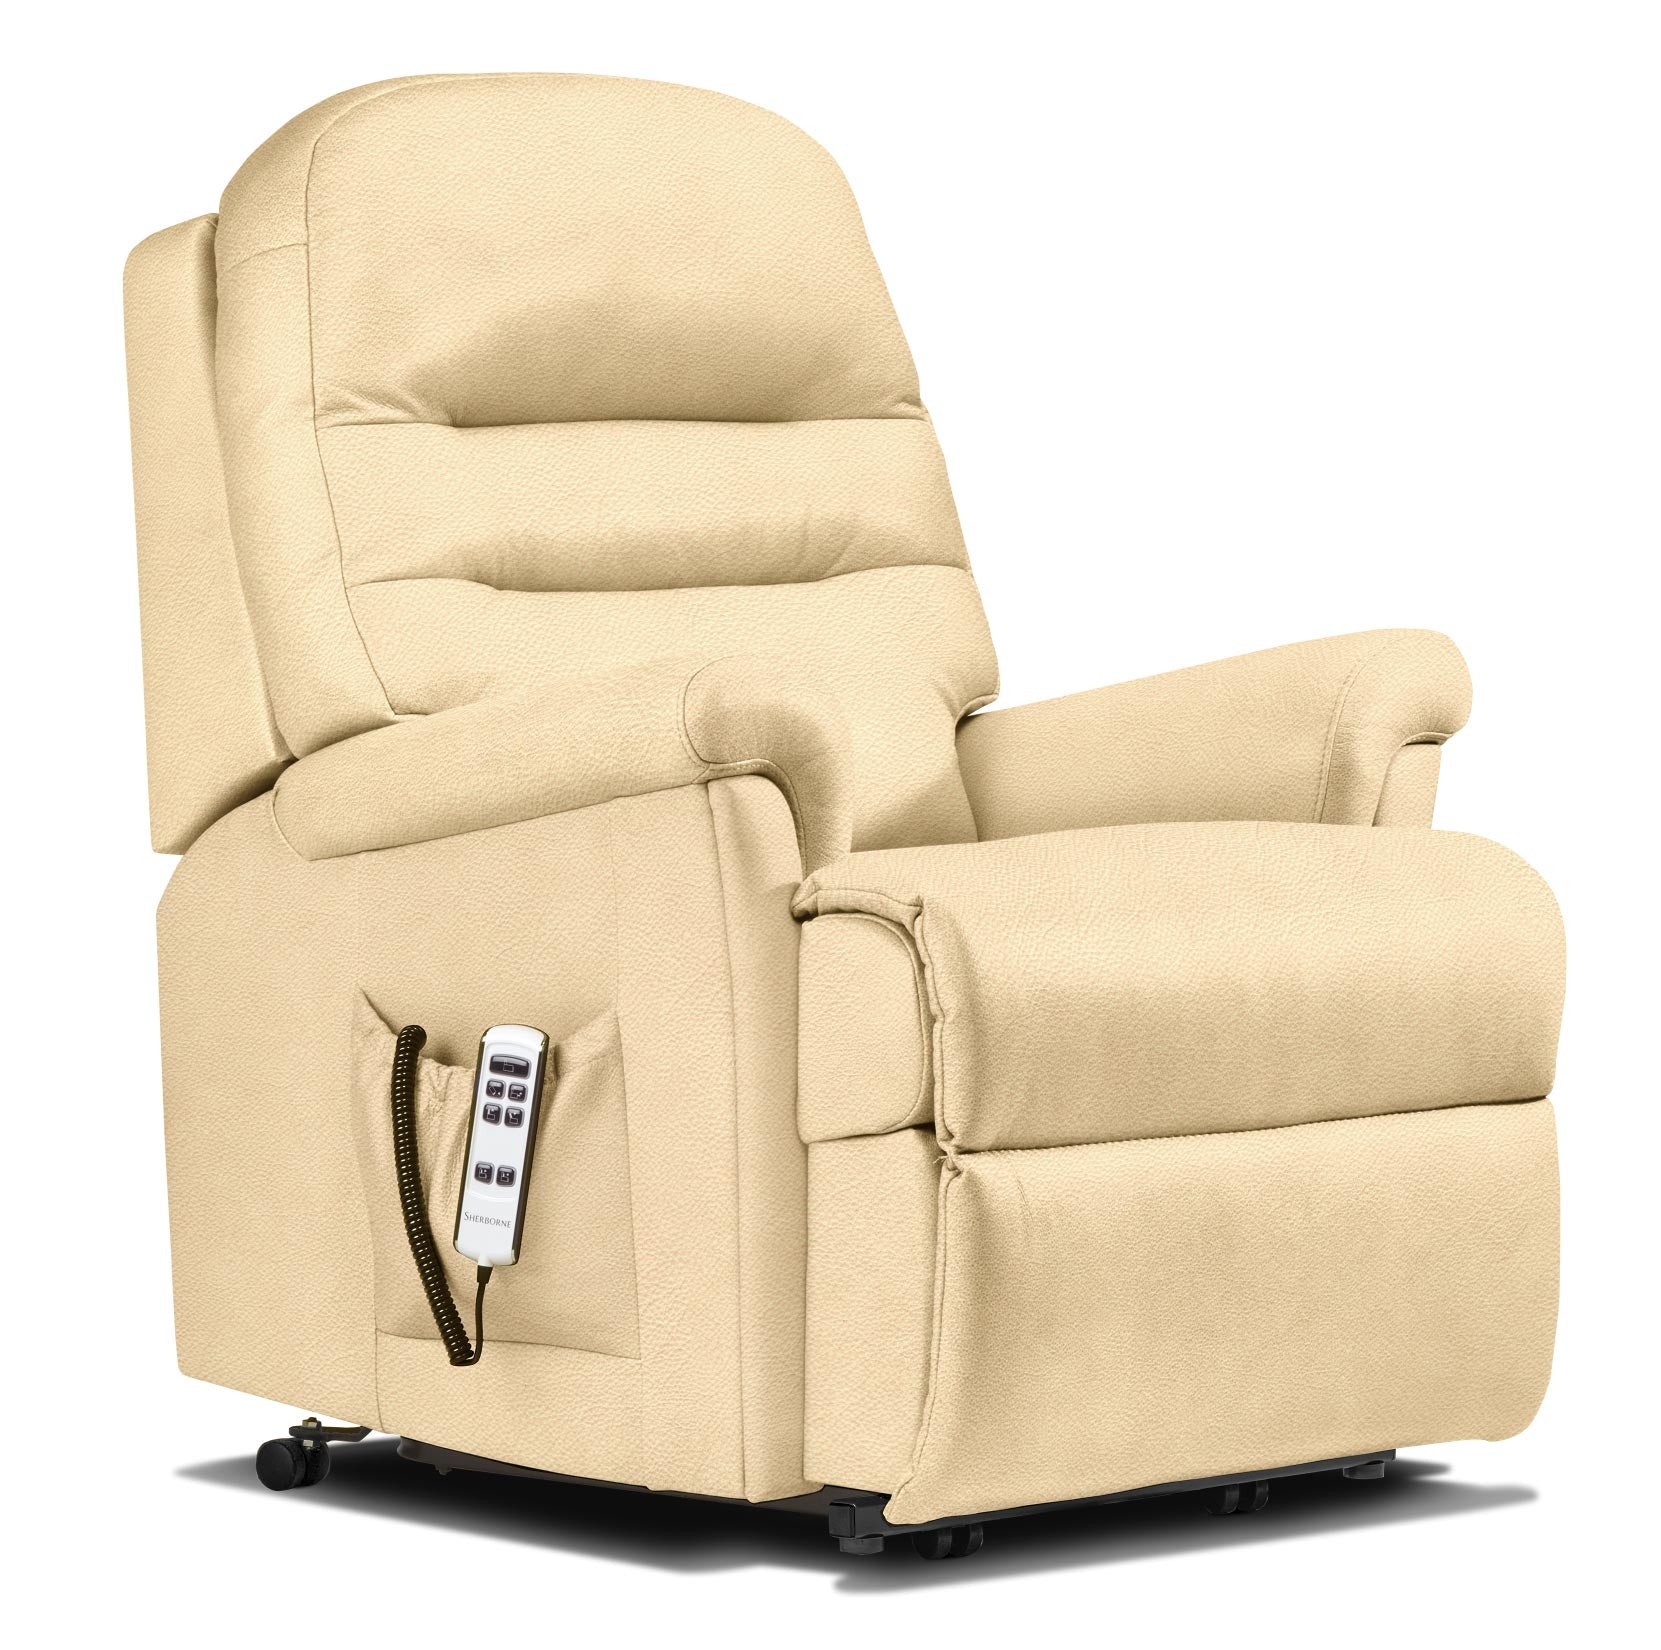 Beaumont Leather Riser Recliner